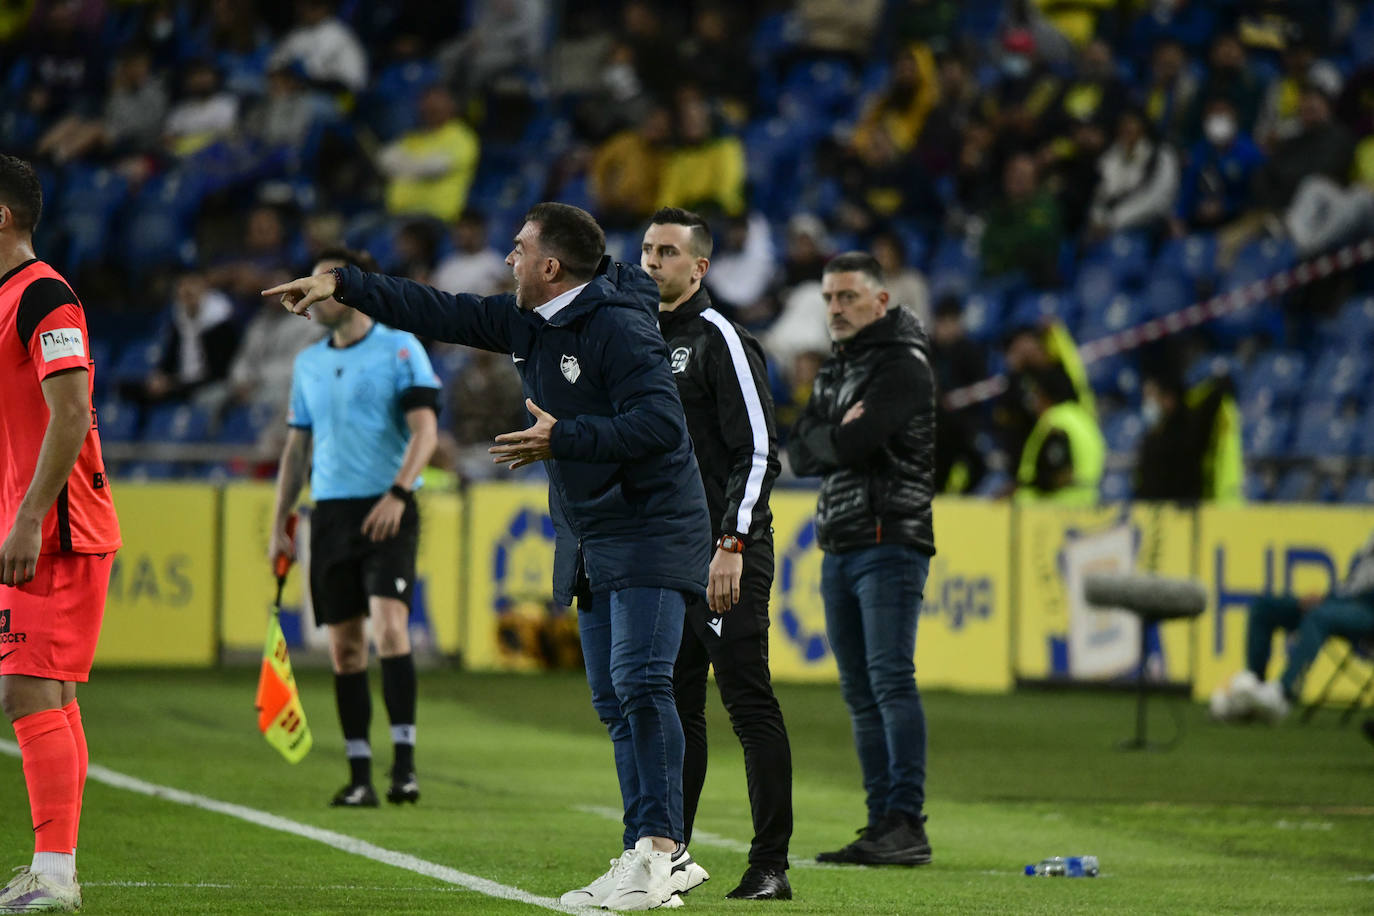 Malaga could not take the three points from Las Palmas.